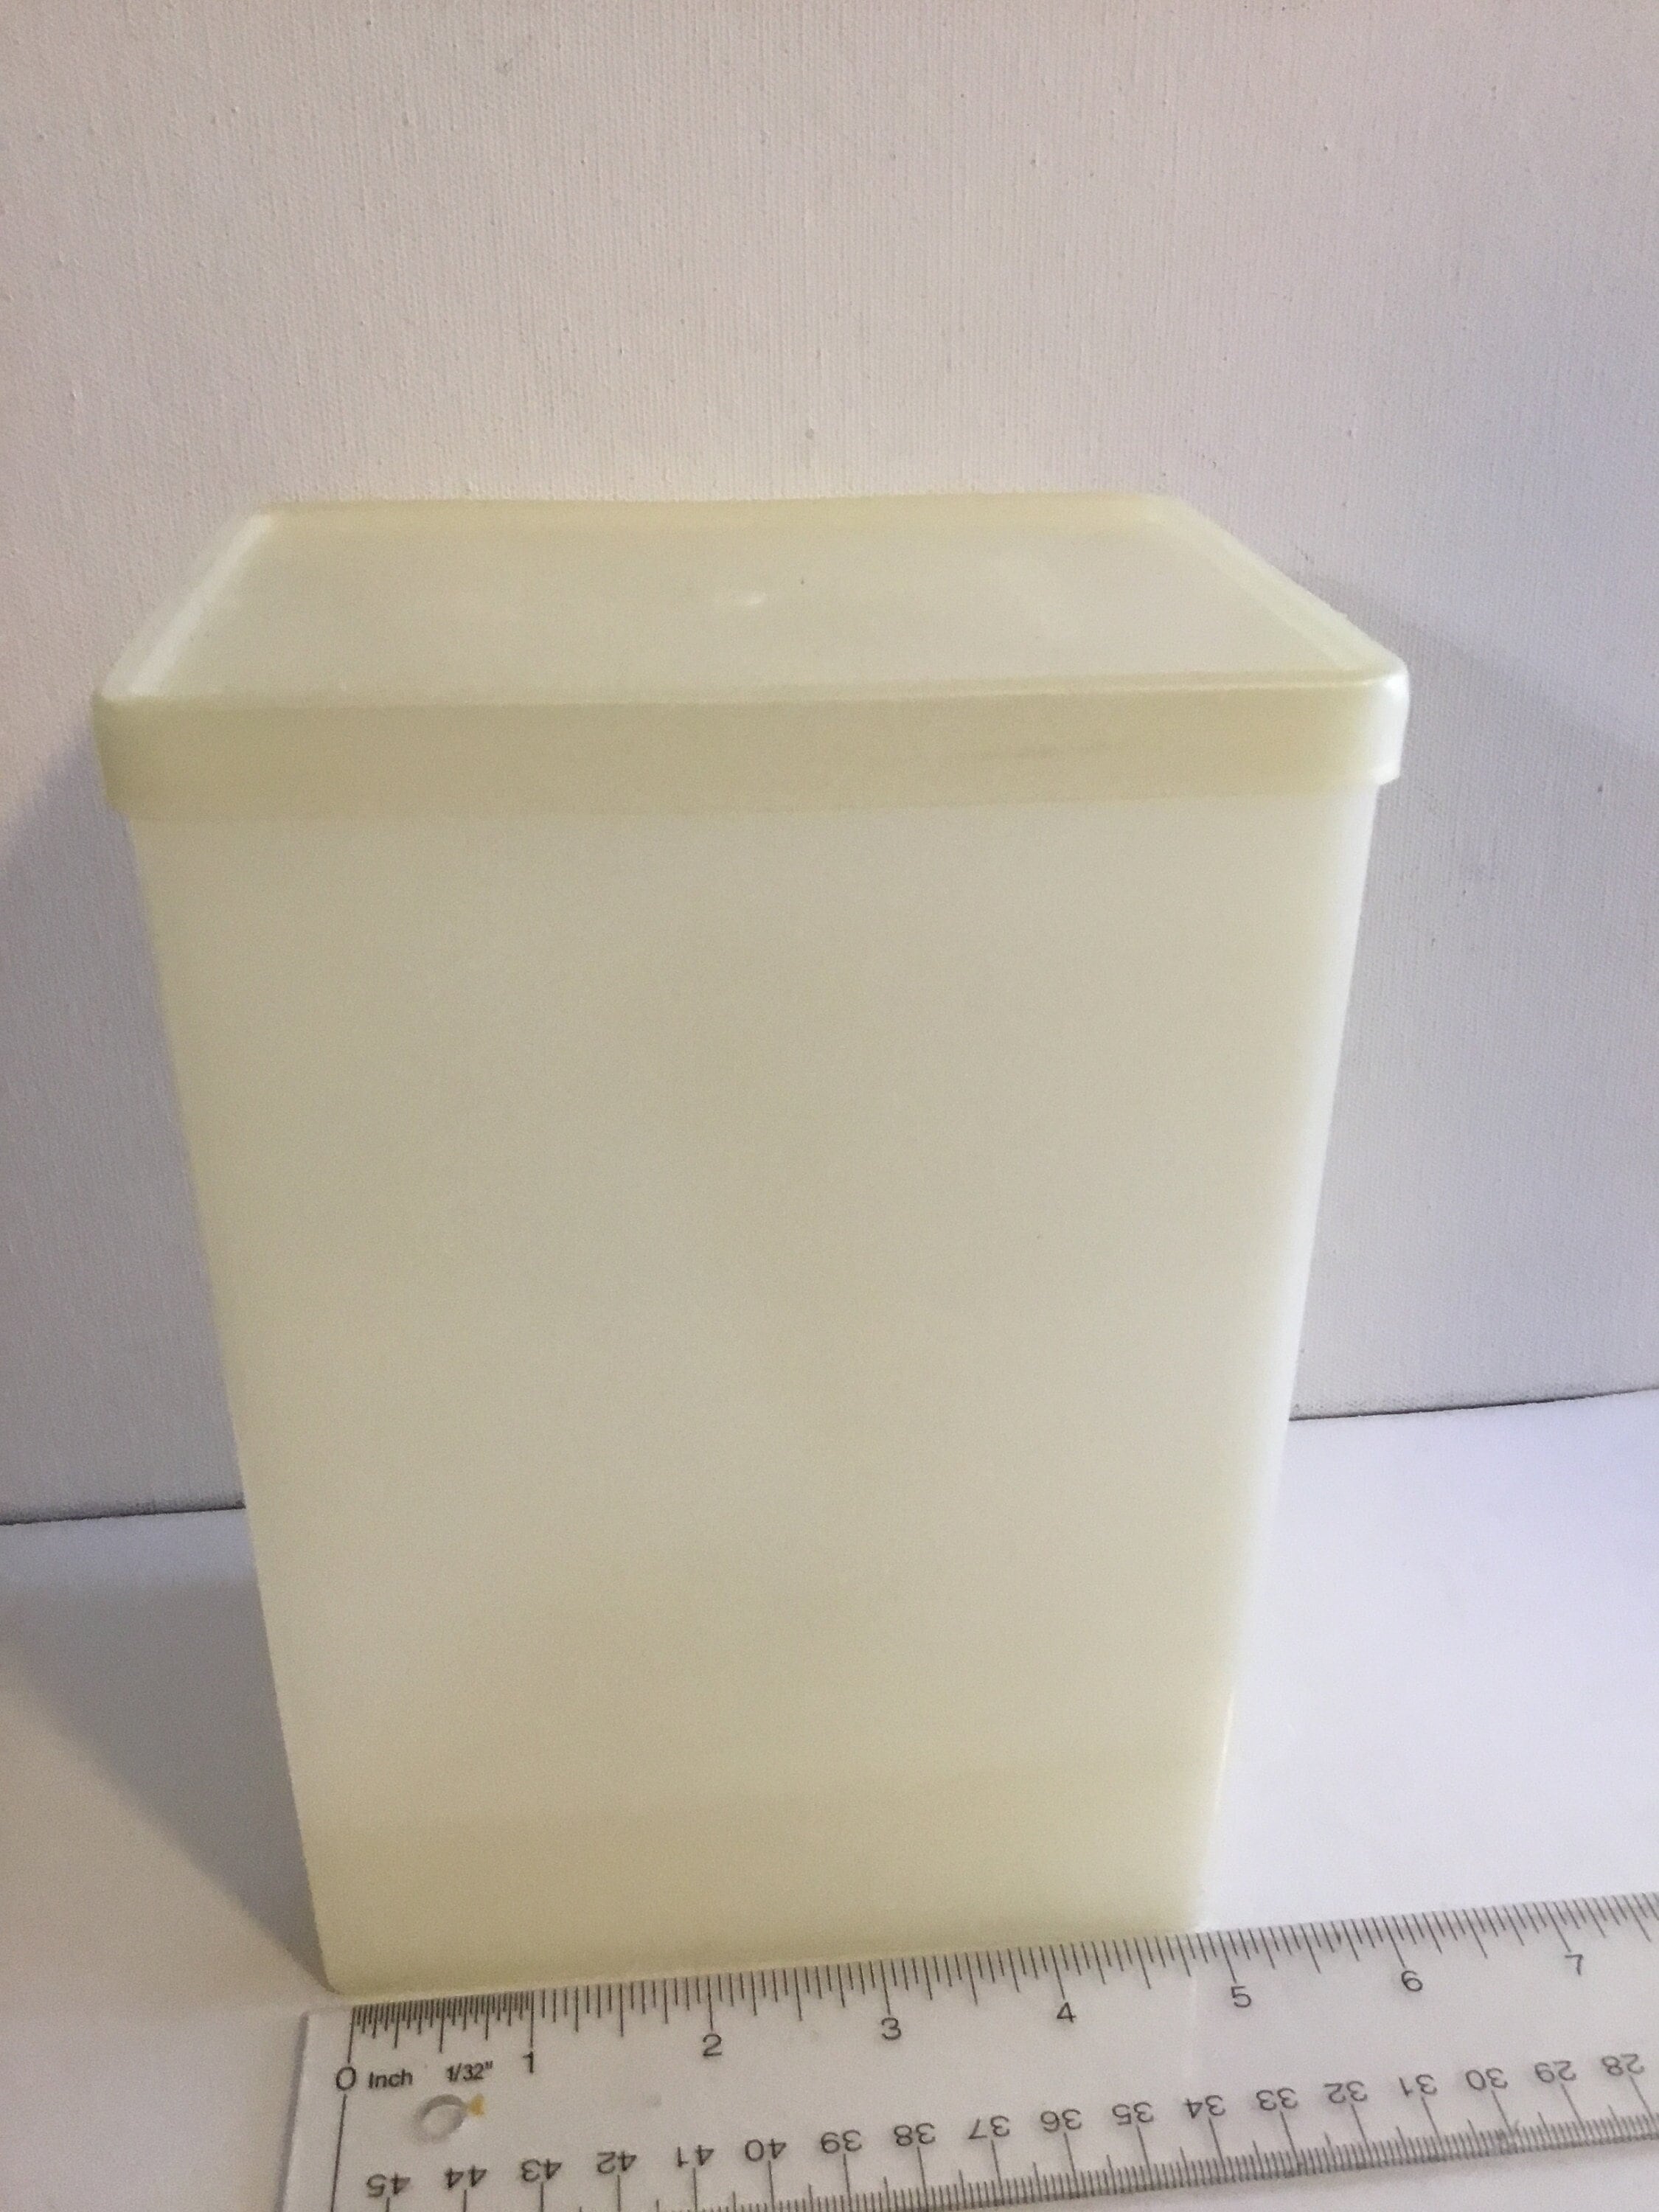 2 Square Rounds, 1 Rectangle, Tupperware Containers, Vintage